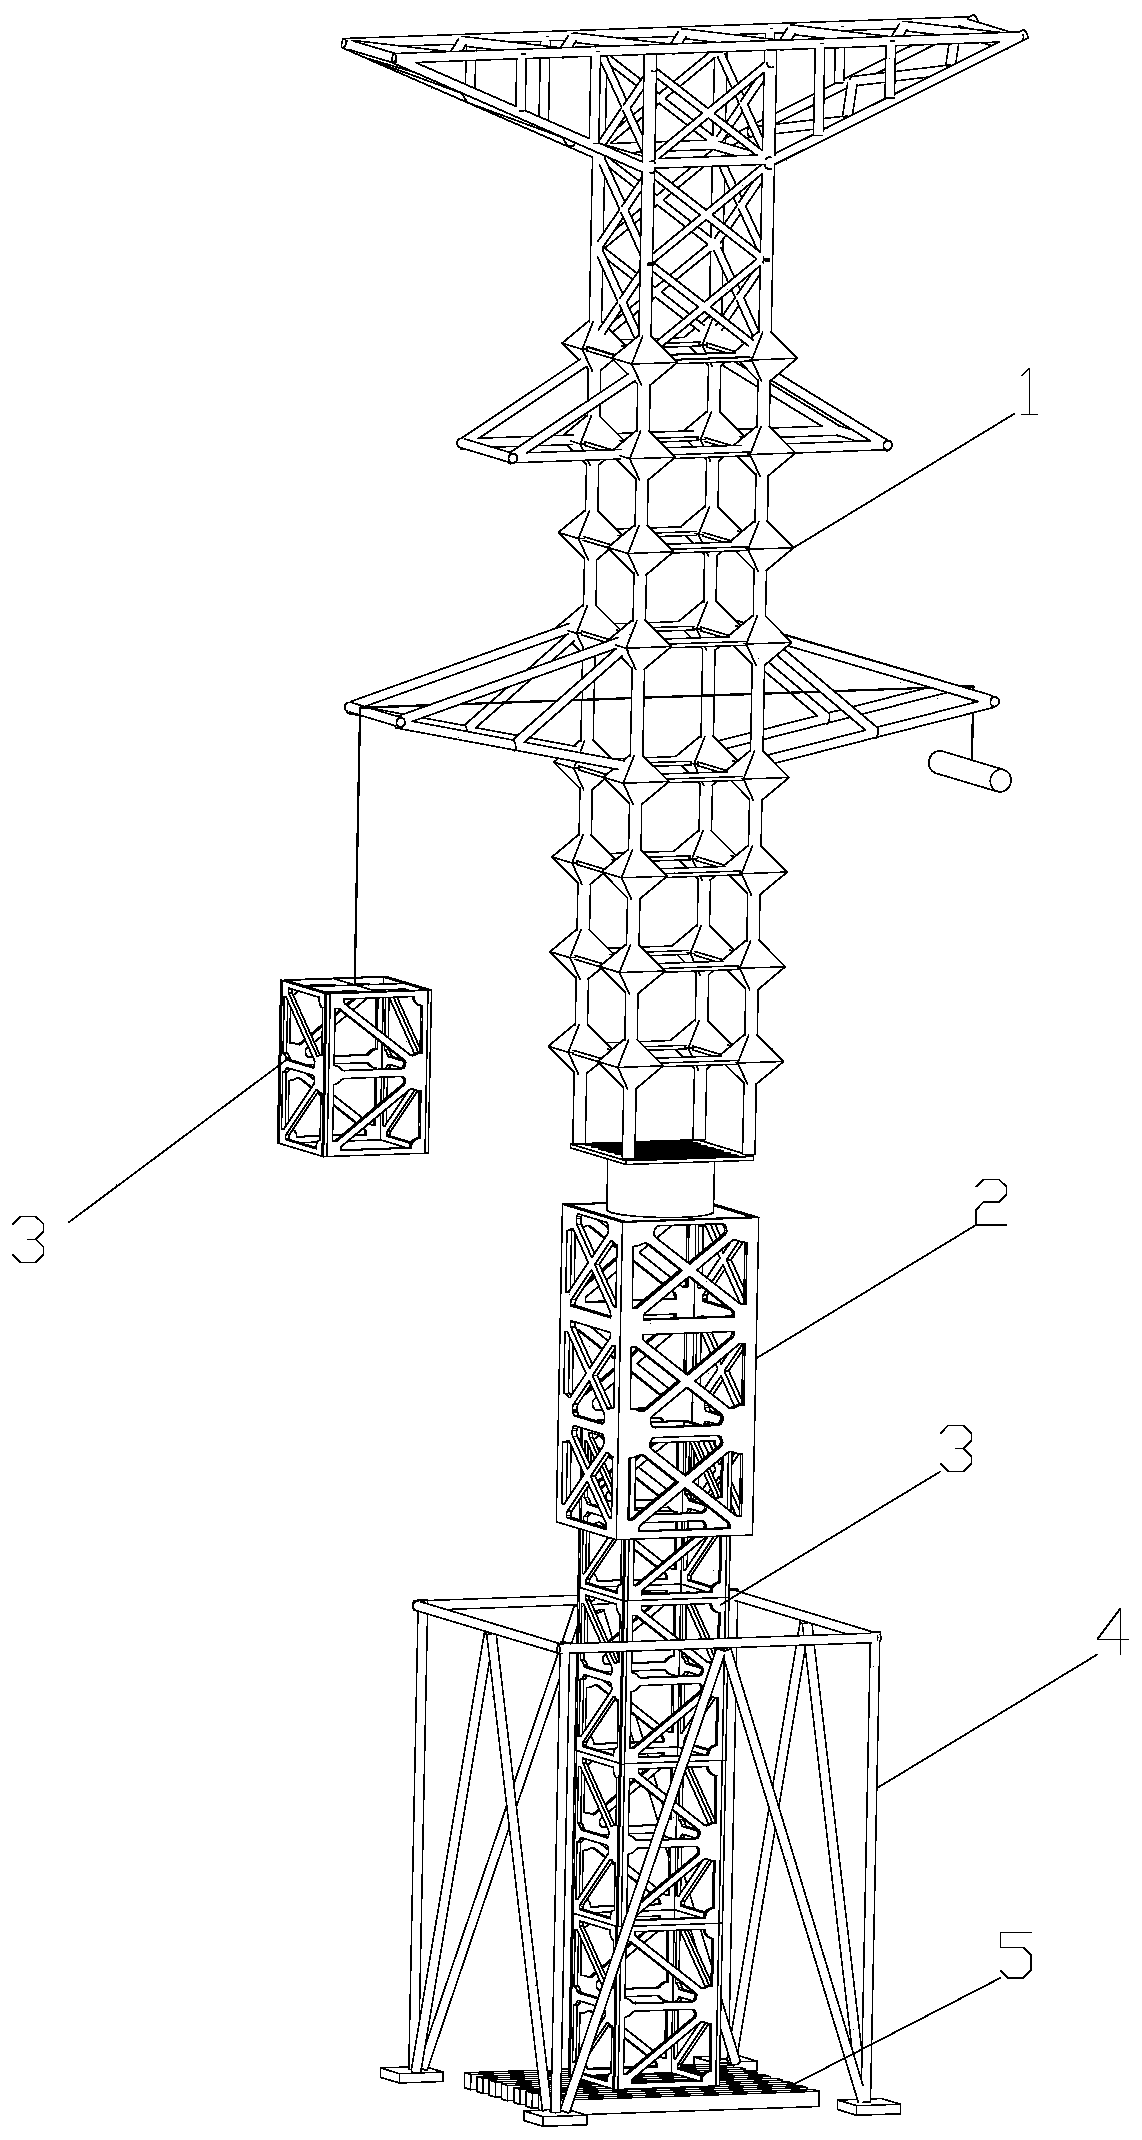 Self-lifting tower erecting device and method based on semi-rigid composite material tower head crane